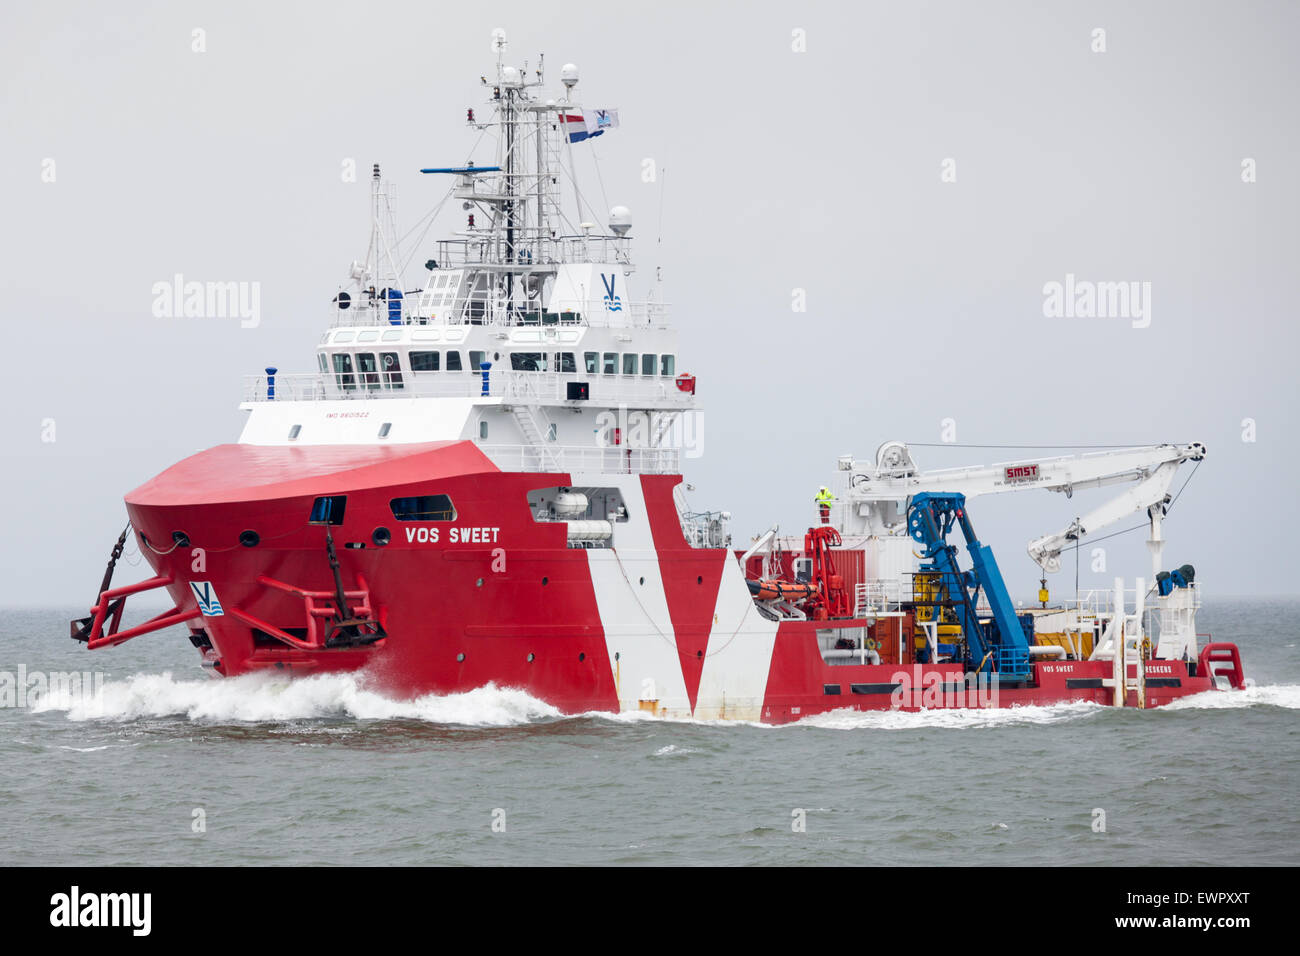 Offshore Support Vessel, Vos Sweet, sailing down the Eems estuary en route to Eemshaven in the Netherlands. Stock Photo